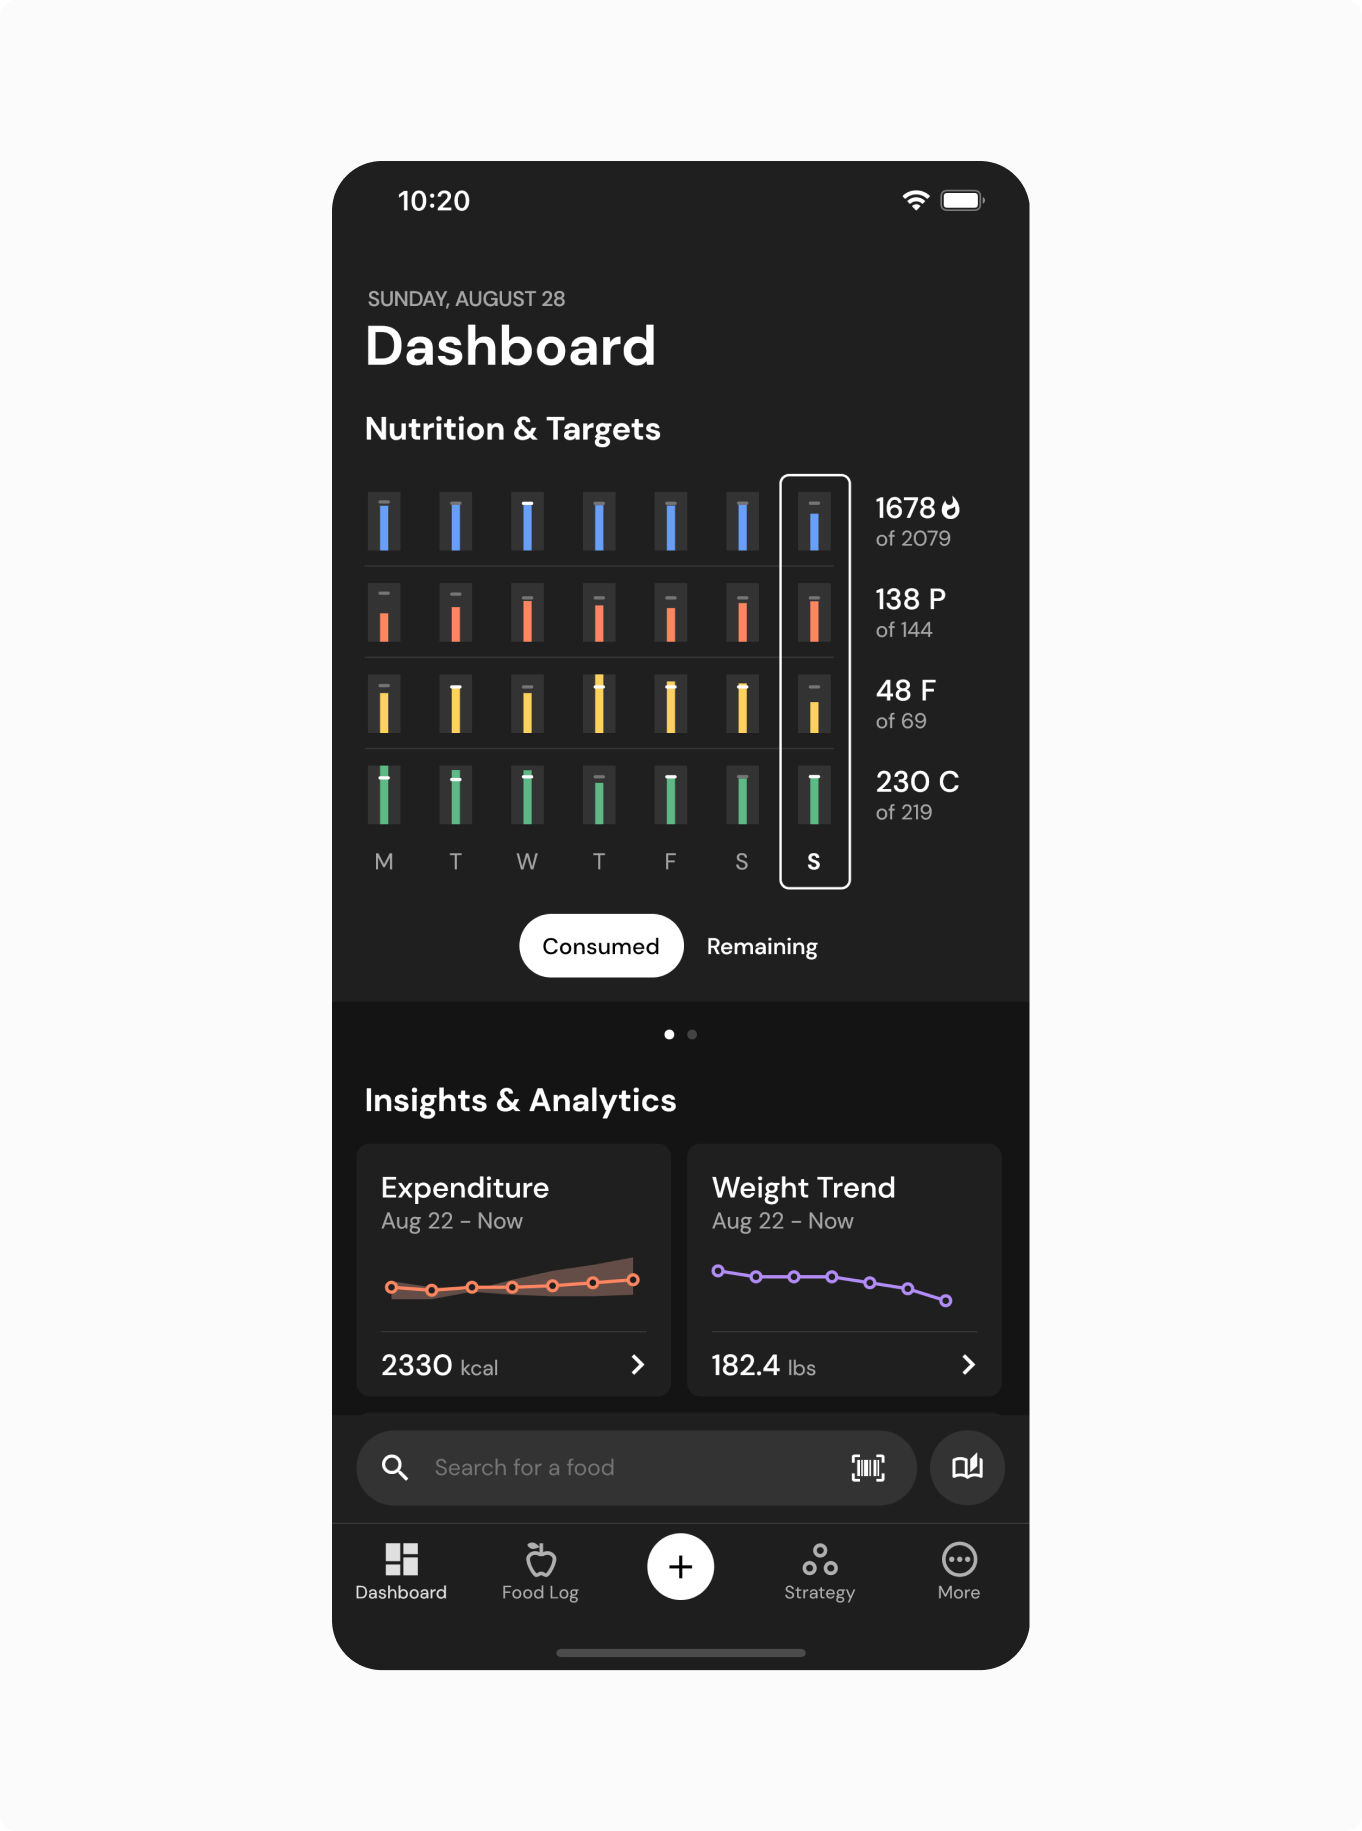 Modern, beautiful, and comfortable dashboard brings actionable insights front and center